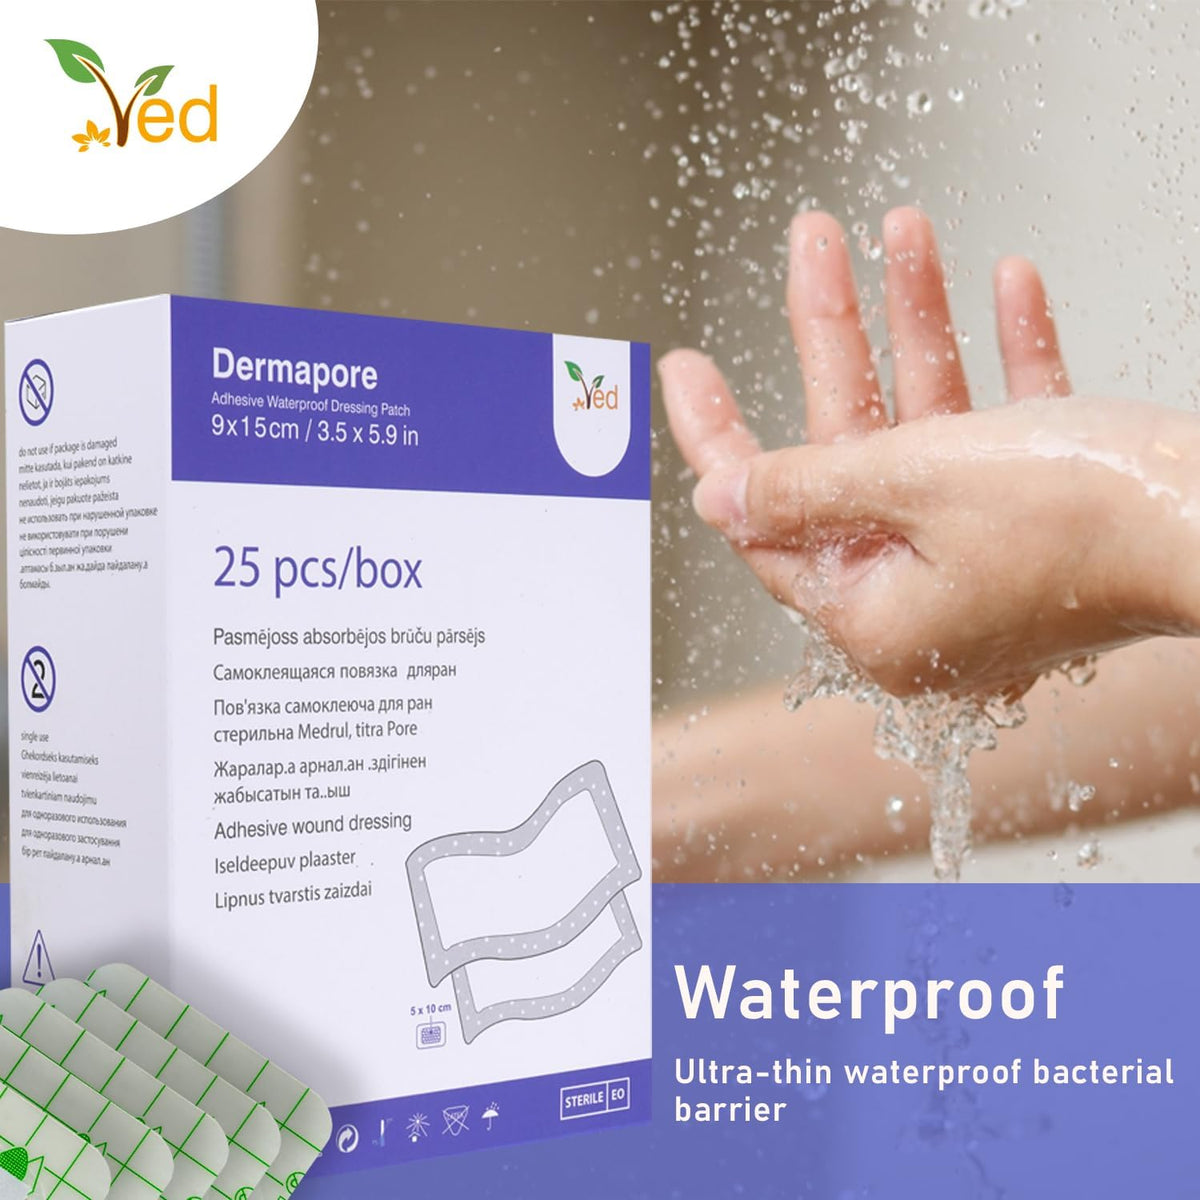 VED Dermapore Waterproof Adhesive Wound Dressing- Suitable for cuts and grazes, Diabetic Leg ulcers, venous Leg ulcers, Small Pressure sores- Medium, 9 x 15cm (Pack of 25).